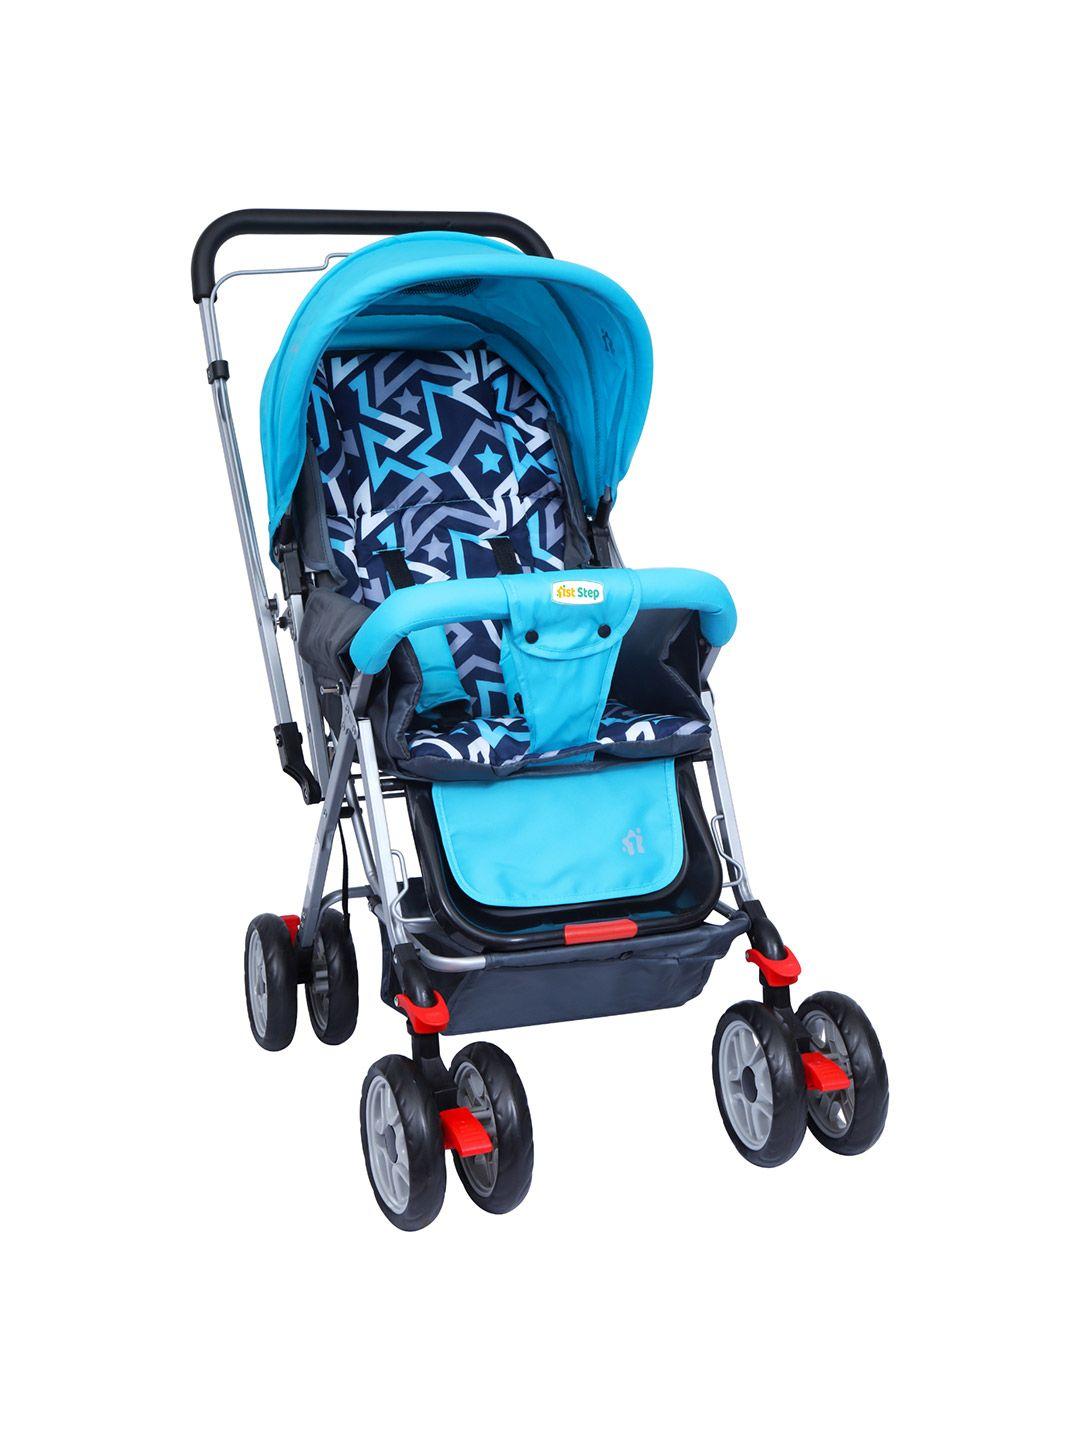 1st step kids blue & black baby stroller with 5 point safety harness & reversible handlebar